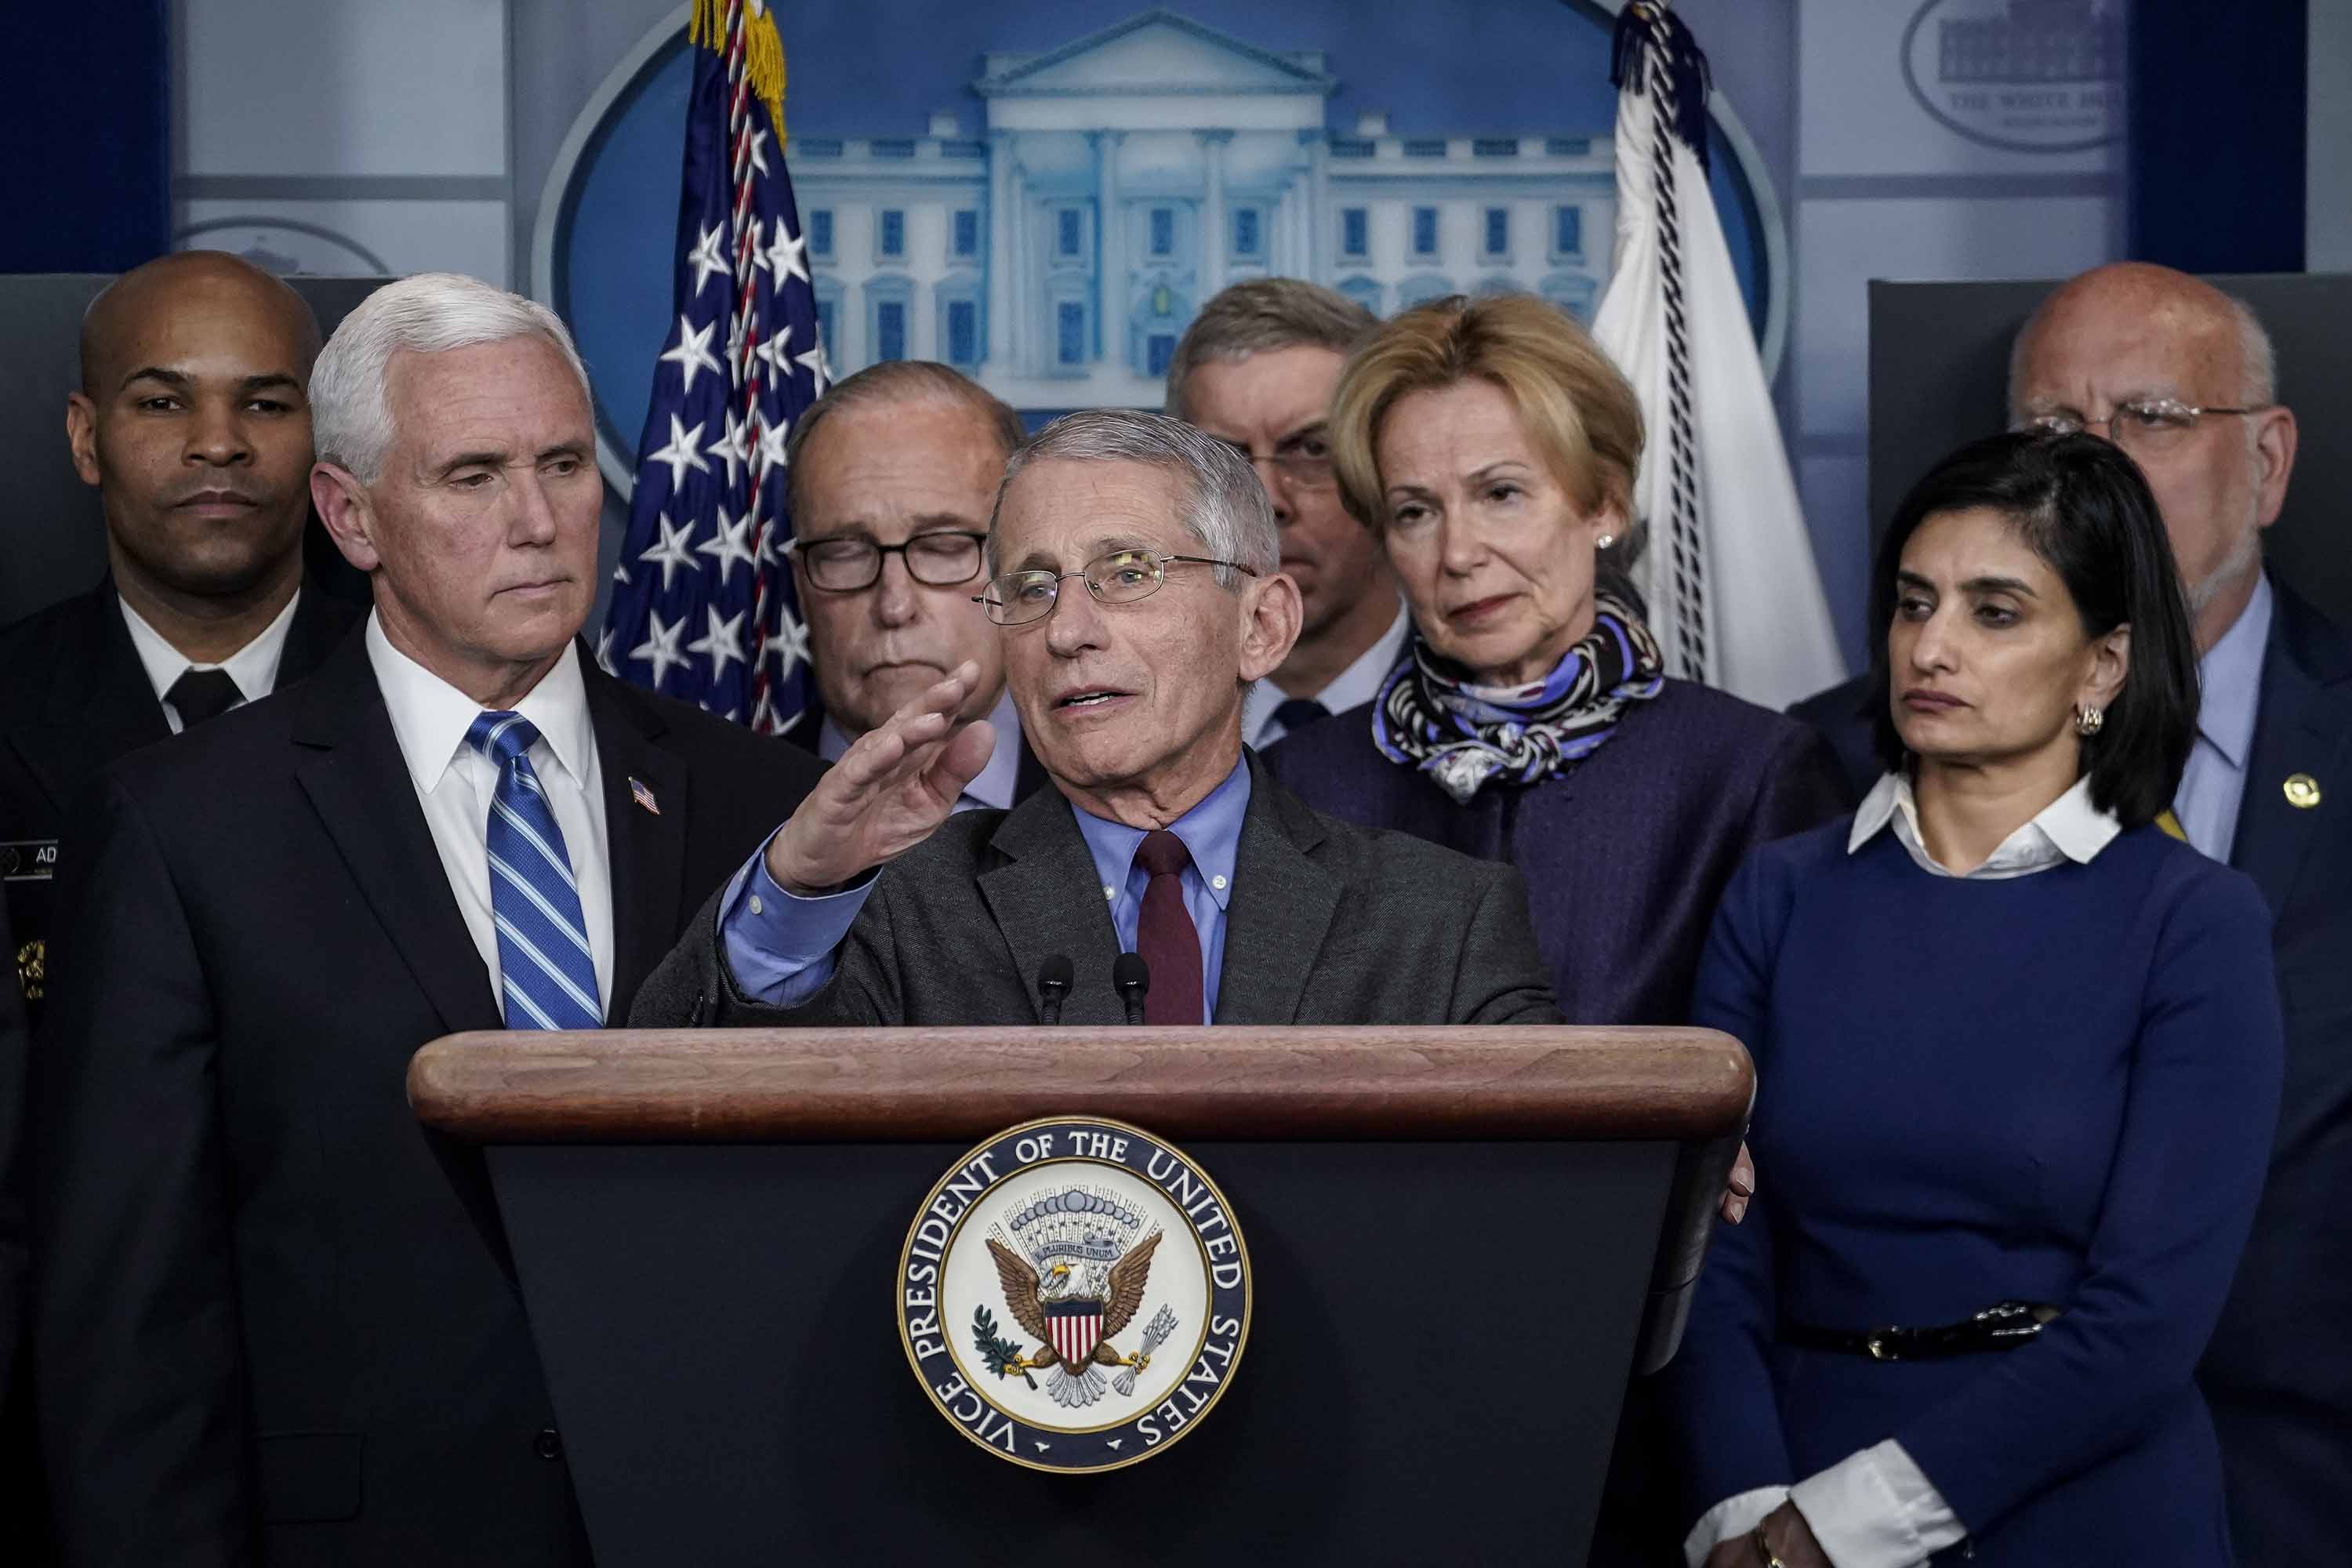 Dr. Anthony Fauci speaks during a press briefing at the White House on Tuesday.